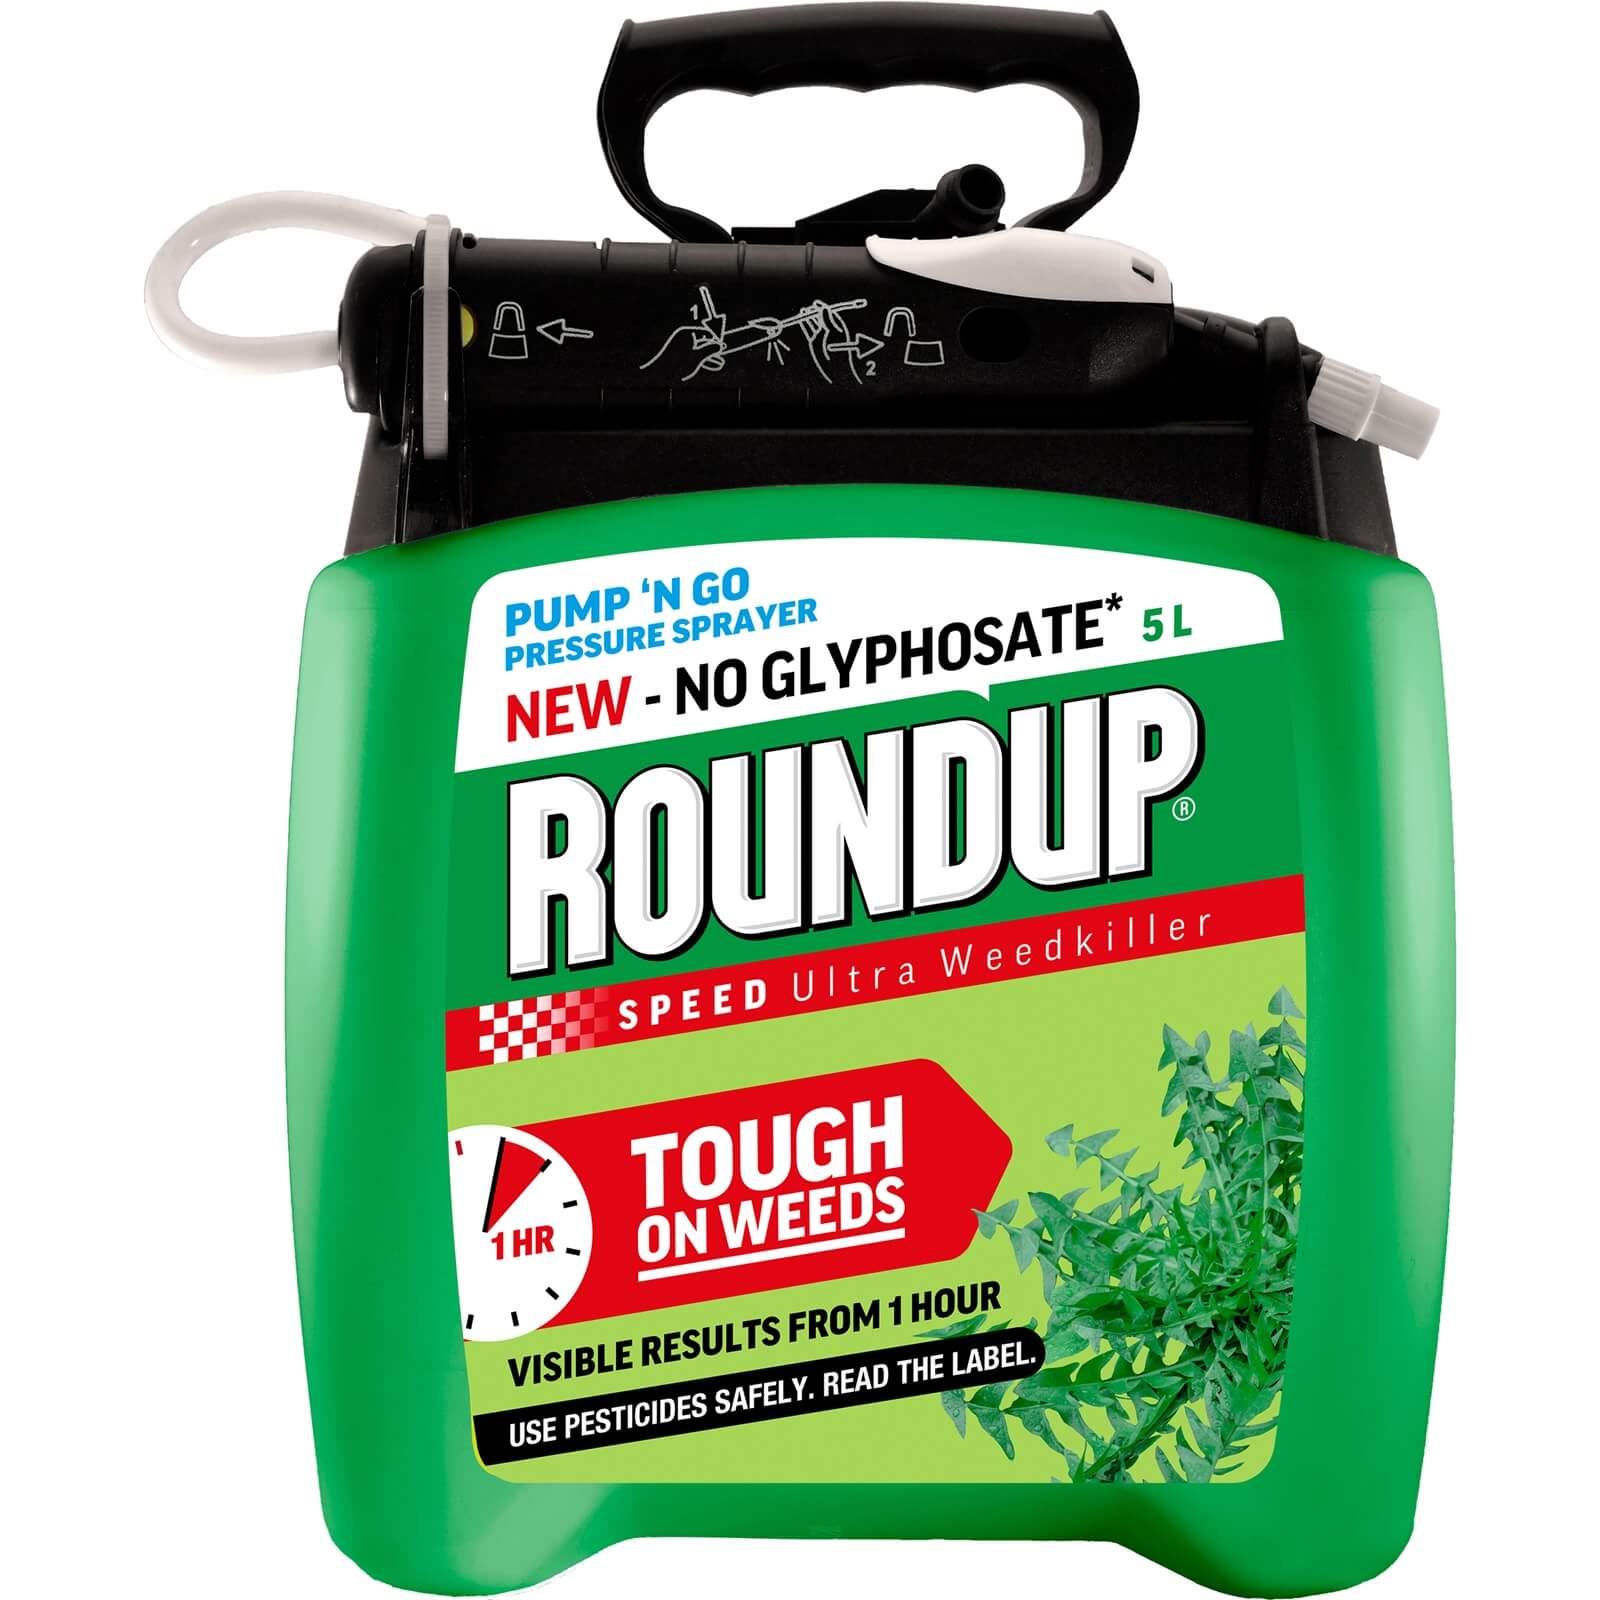 Roundup Speed Ultra Ready To Use Pump N Go Weedkiller - 5L